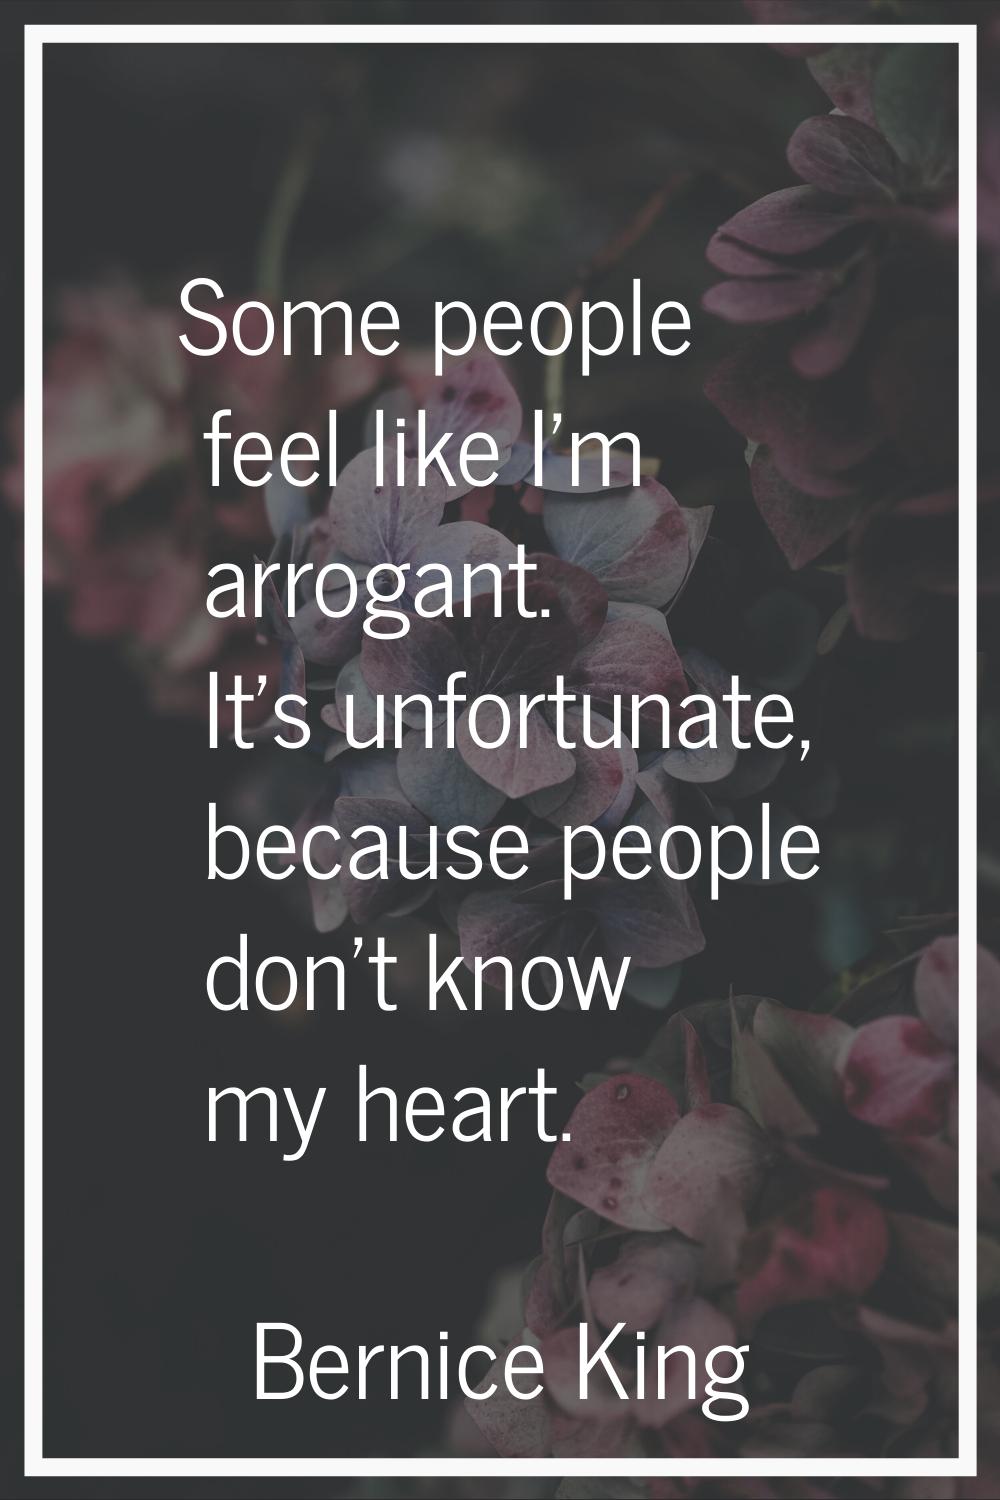 Some people feel like I'm arrogant. It's unfortunate, because people don't know my heart.